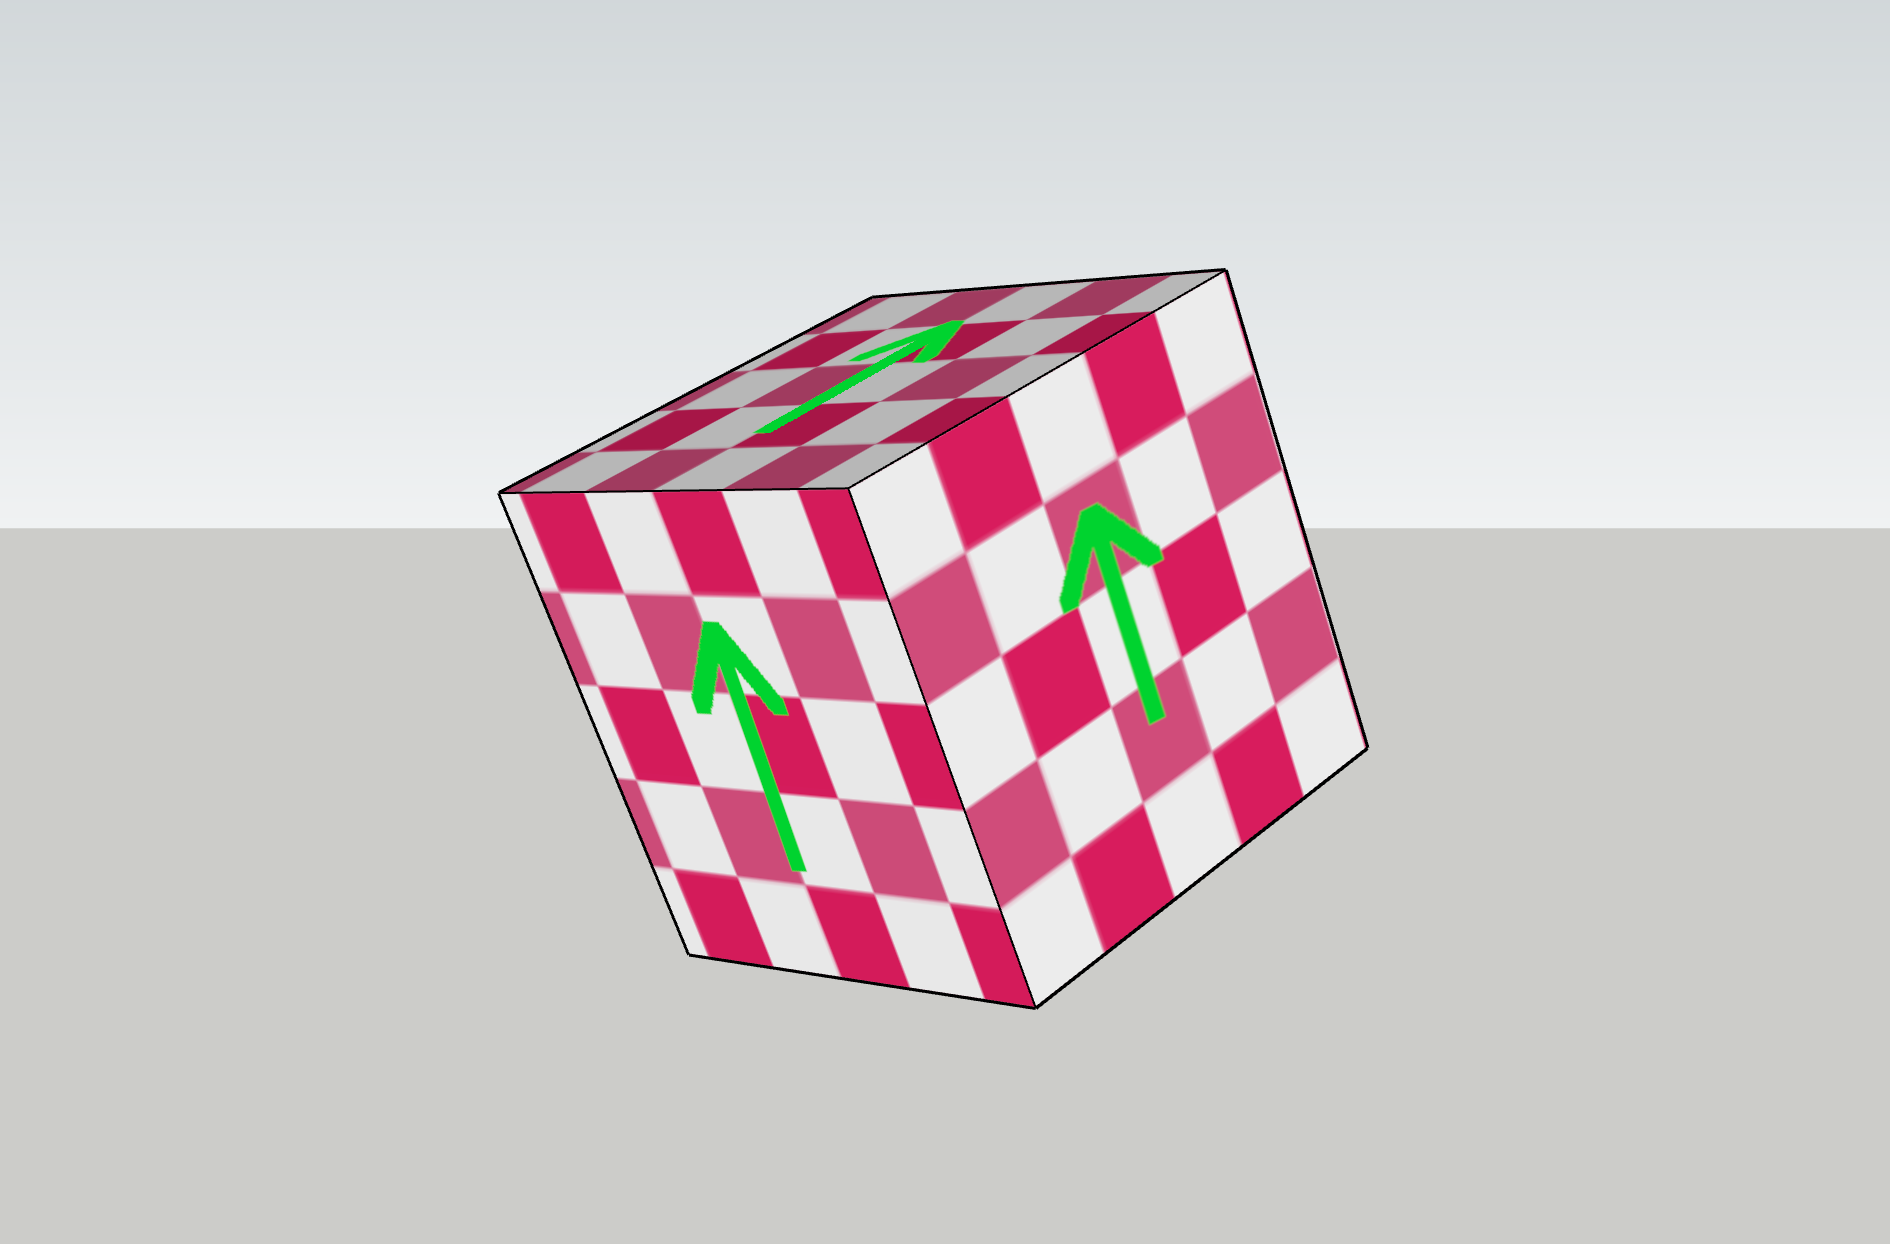 A diagram of a cube, with green arrows pointing up in tangent space, more or less